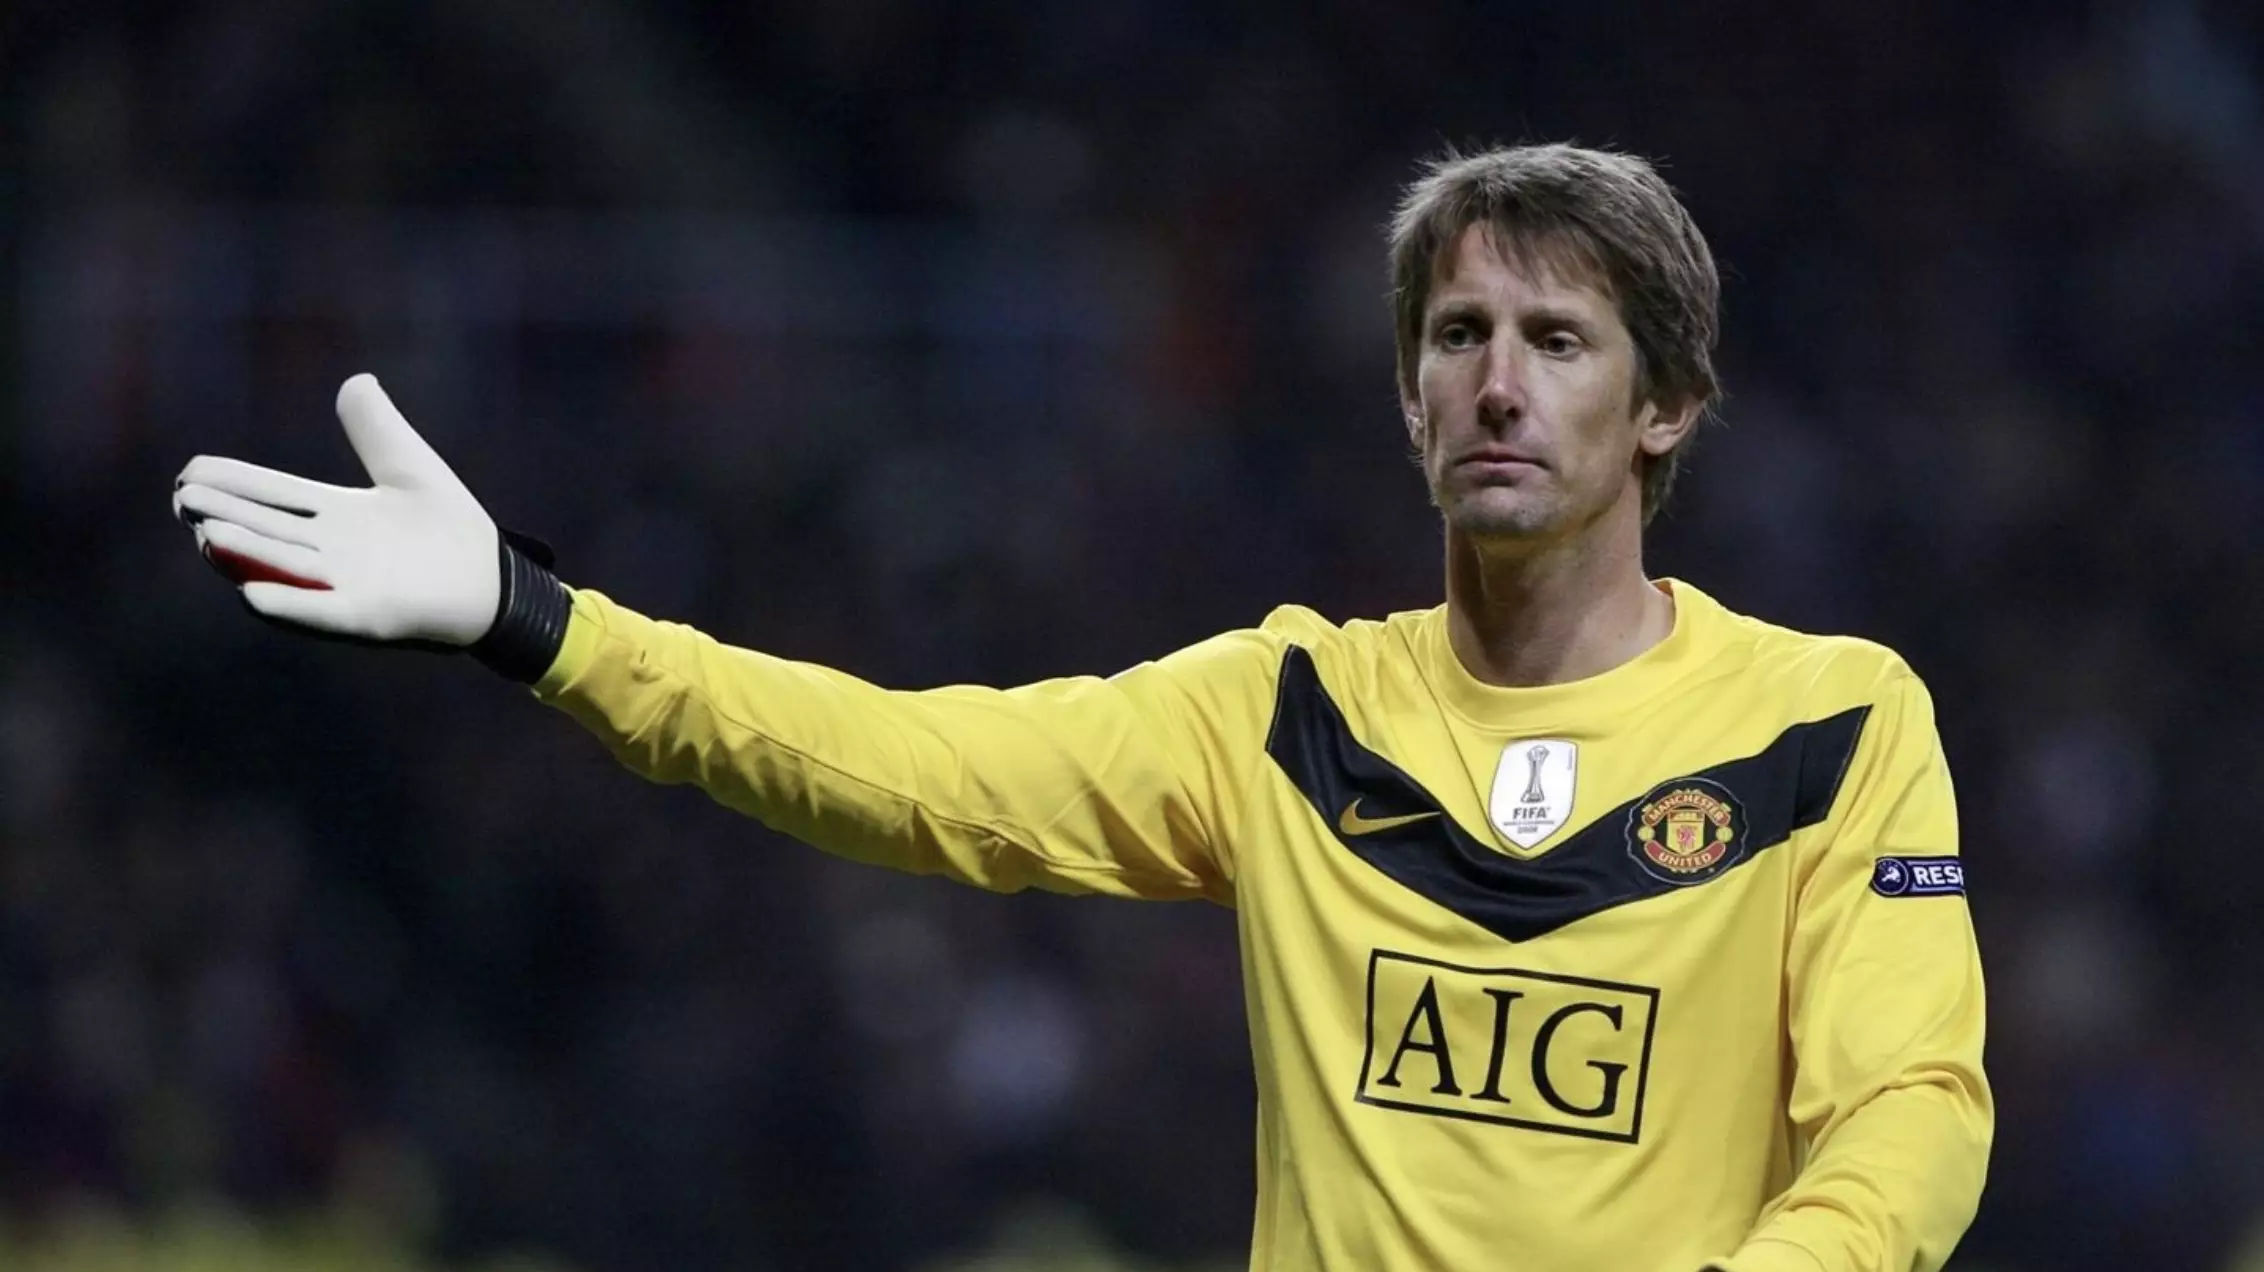 Edwin van der Sar shone brightest during the final years of his career with Manchester United